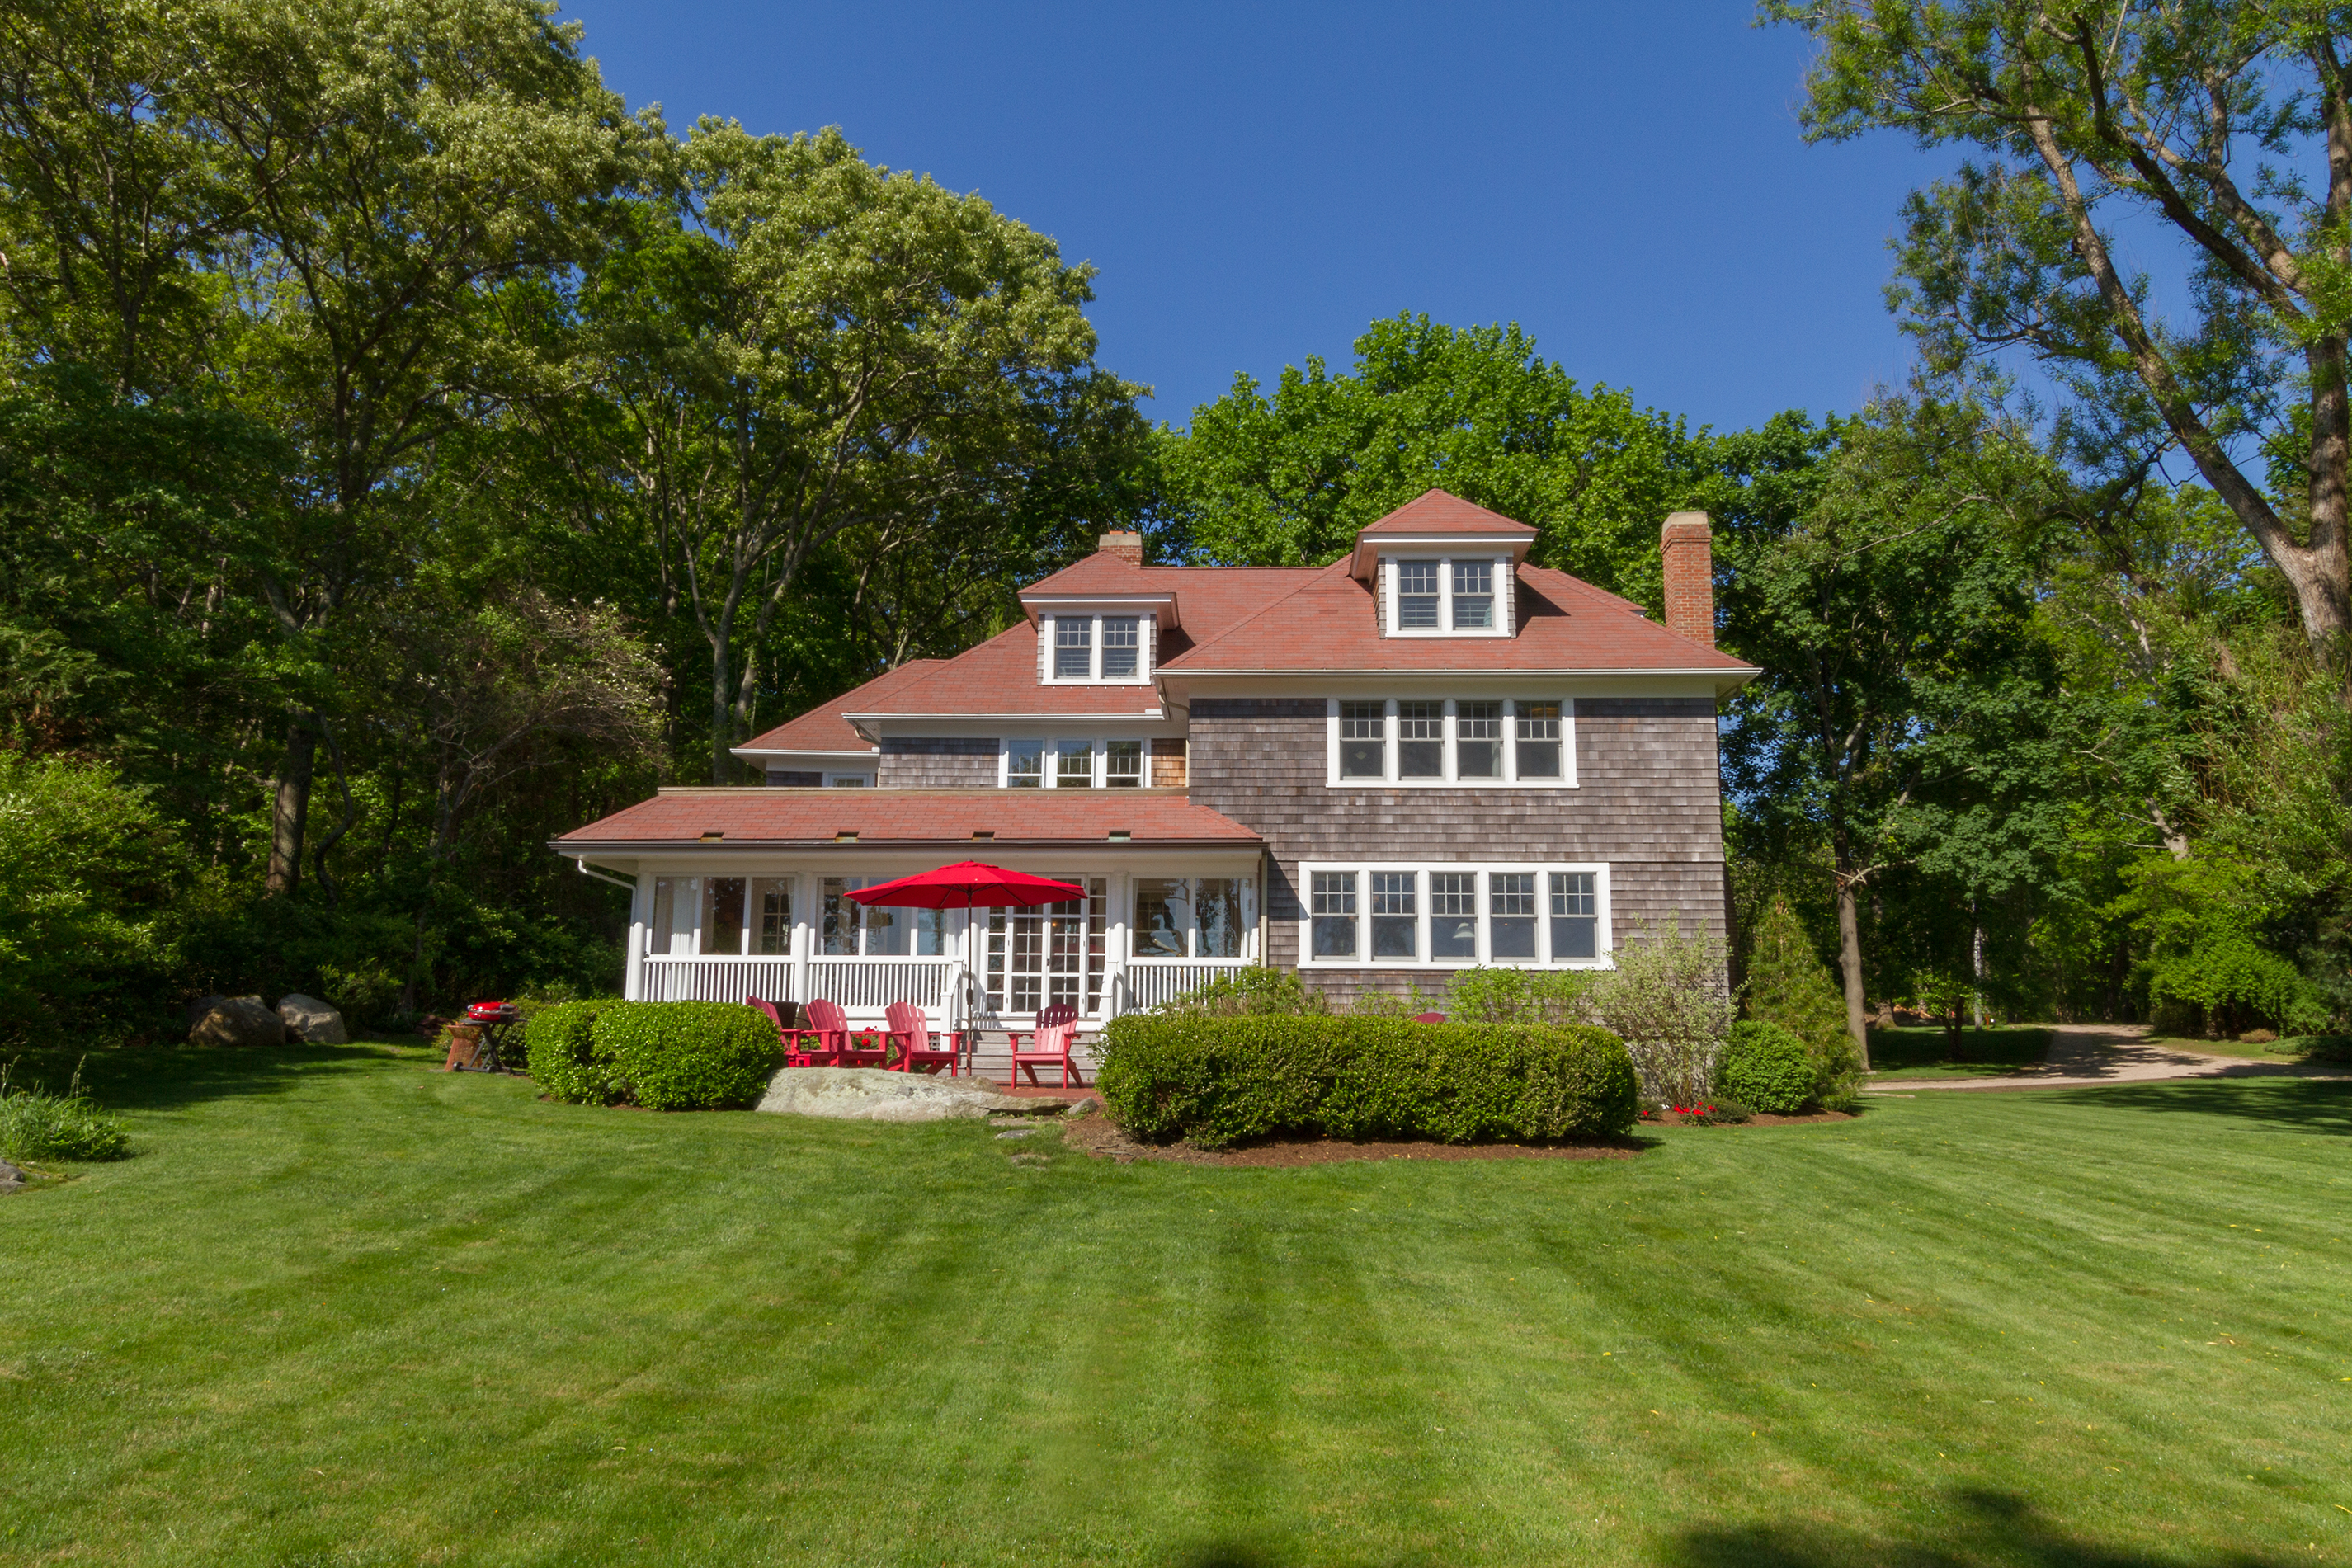 House of the Week: Secluded waterfront walk to Wickford village